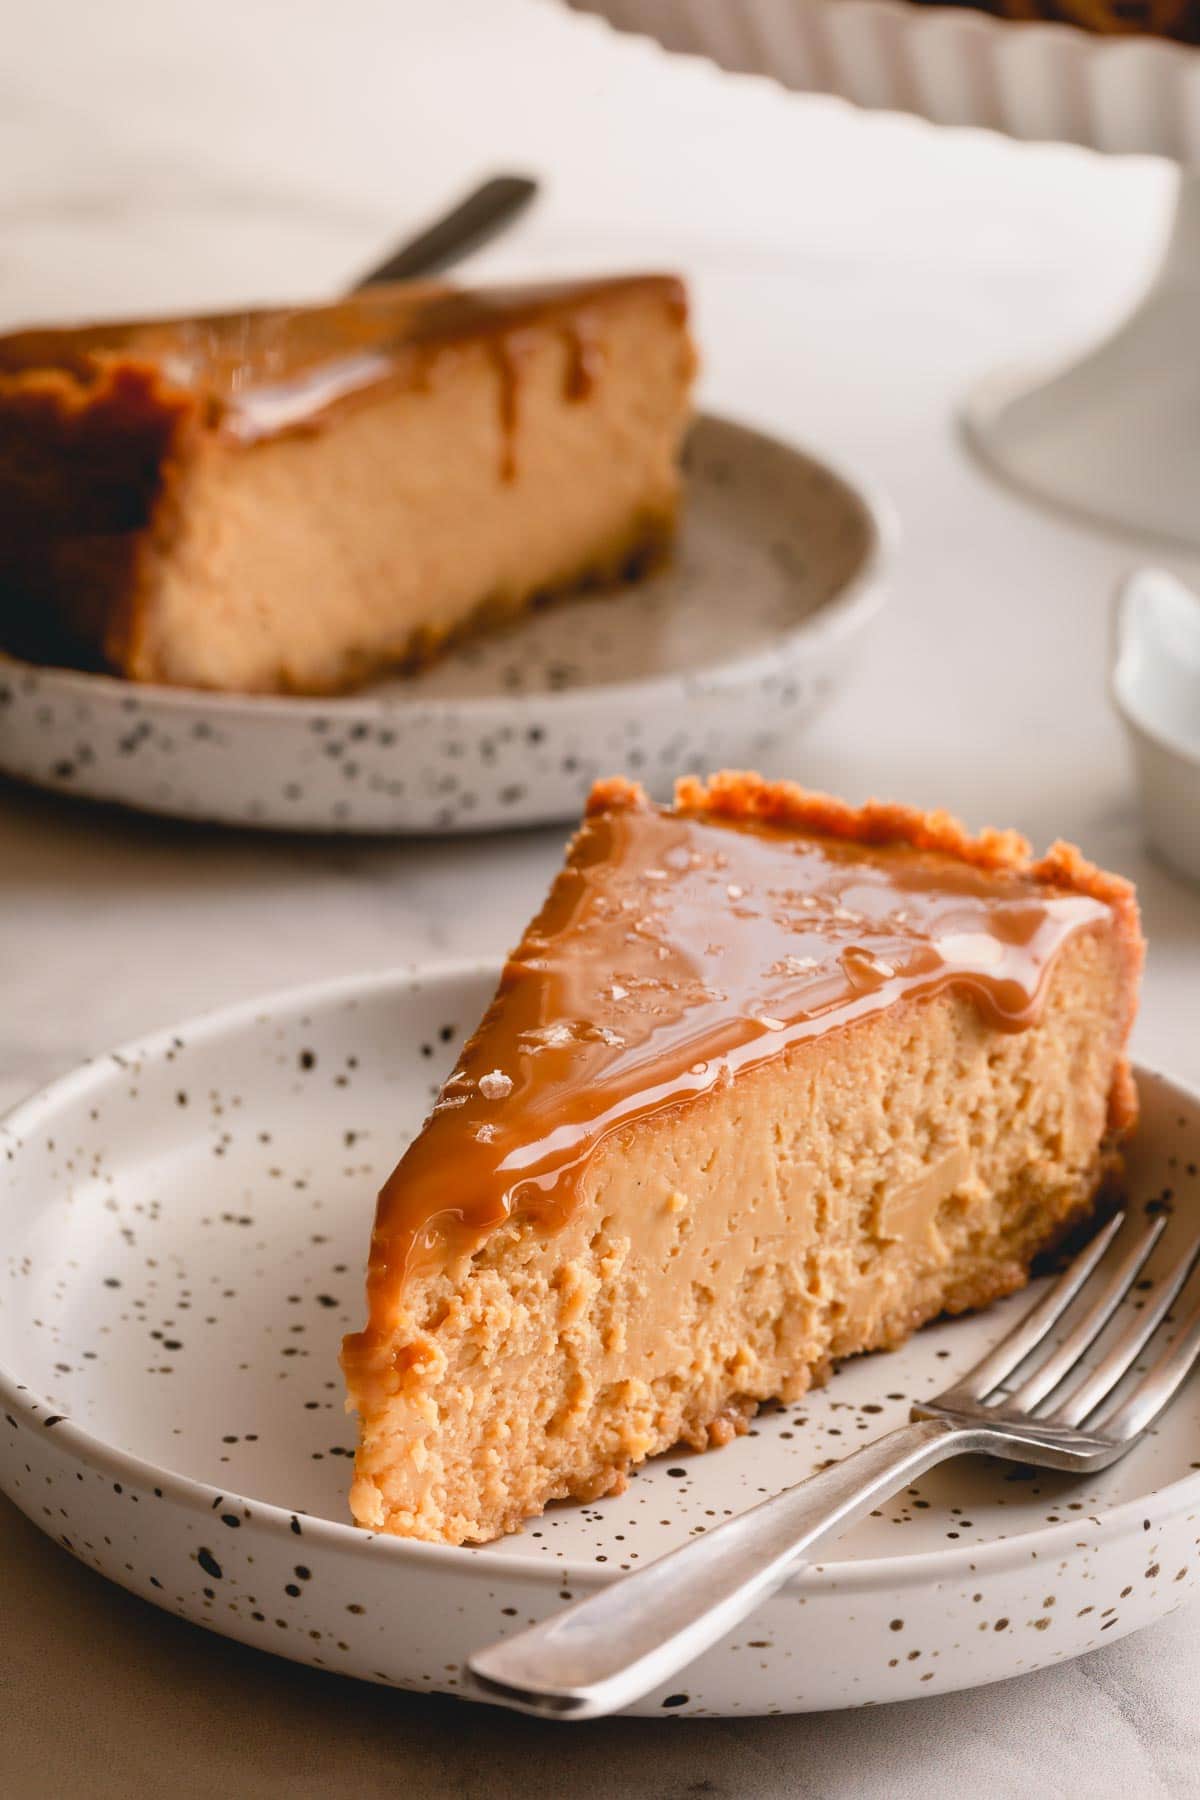 A slice of dulce de leche cheesecake on a small plate.